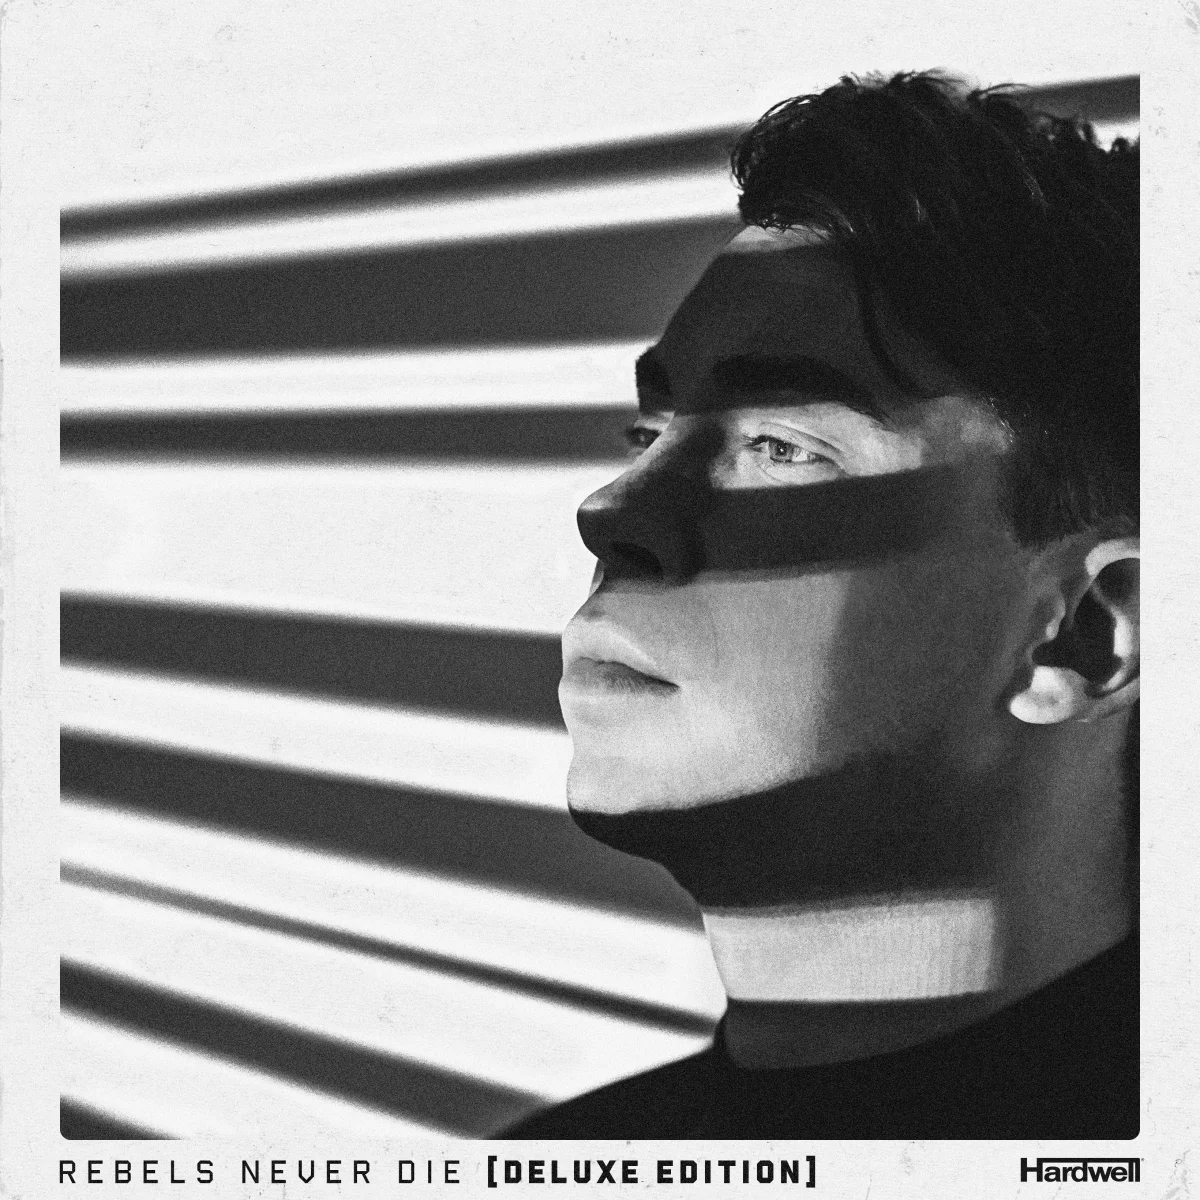 REBELS NEVER DIE (Deluxe Edition) - Hardwell⁠ 